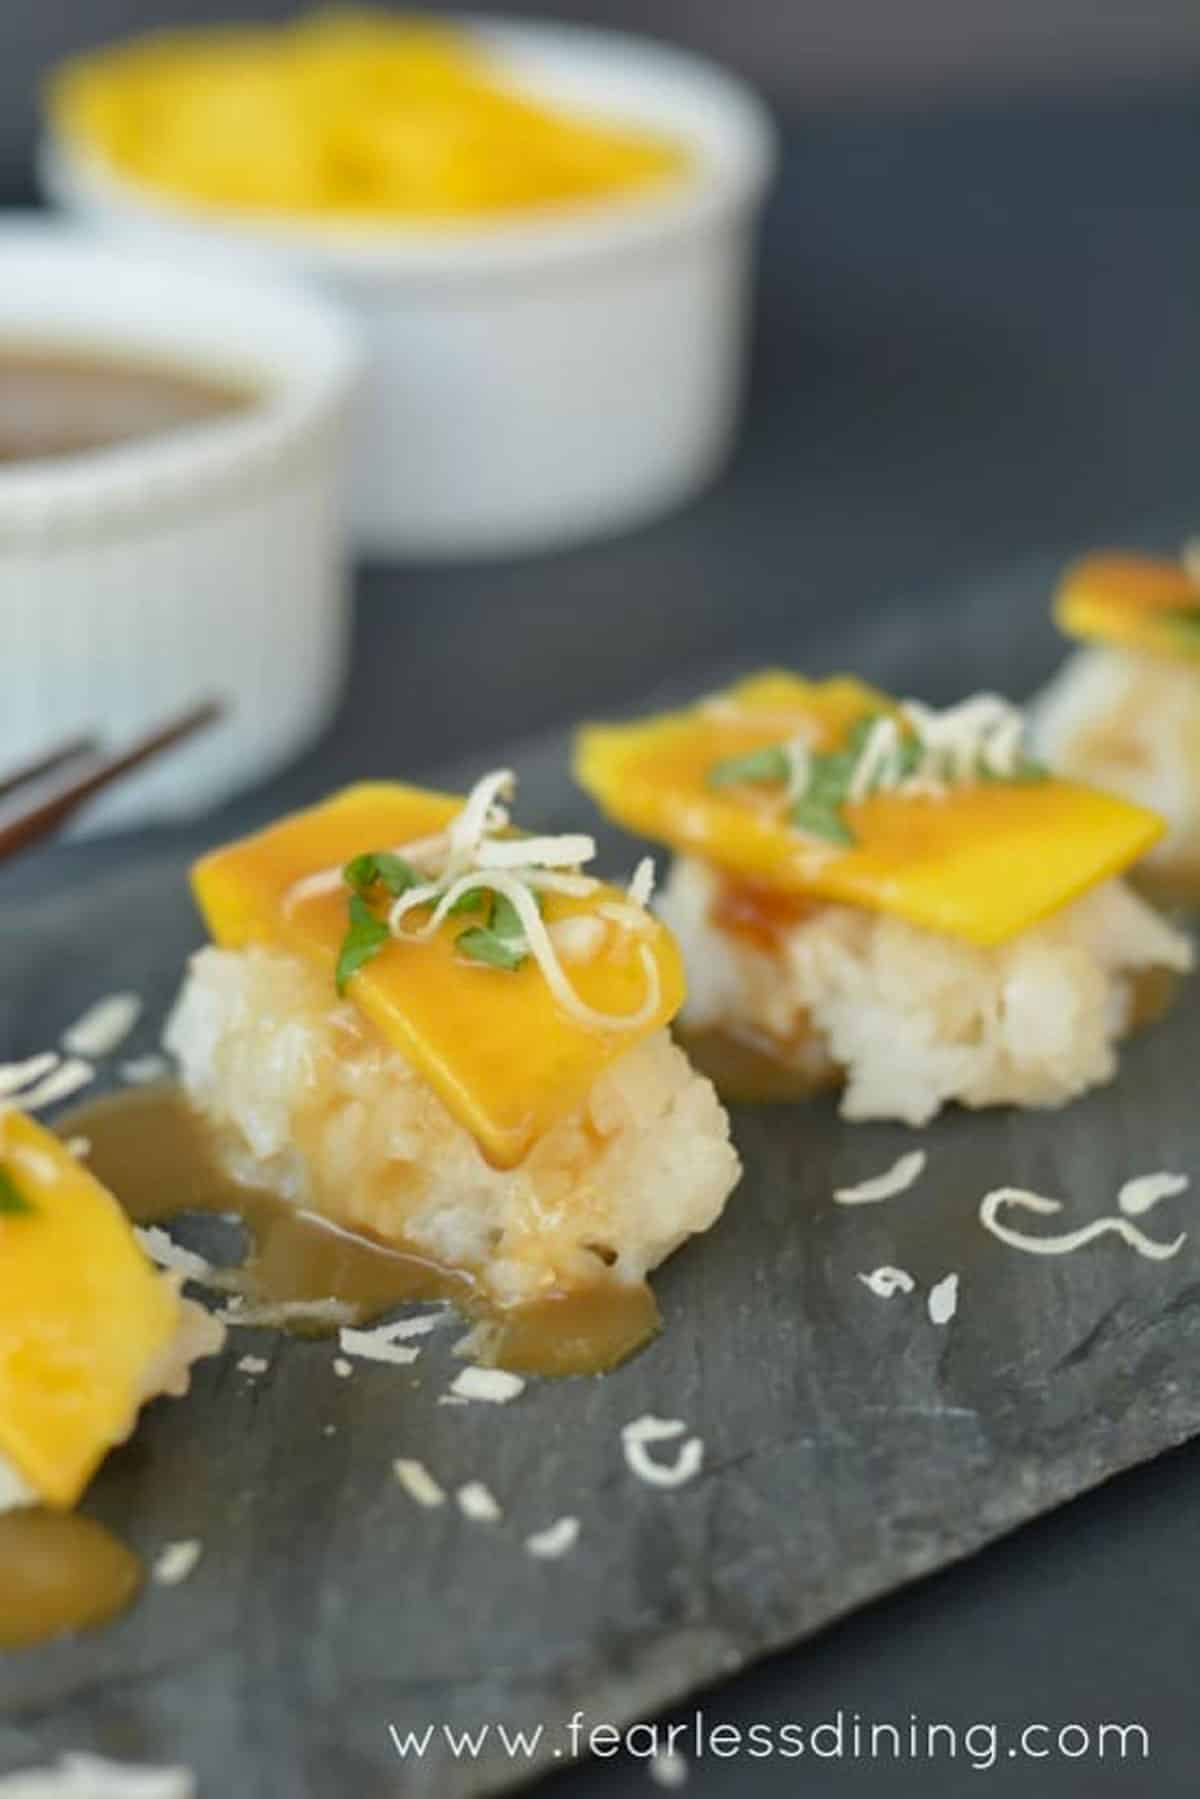 a photo of the mango sushi made with coconut milk.